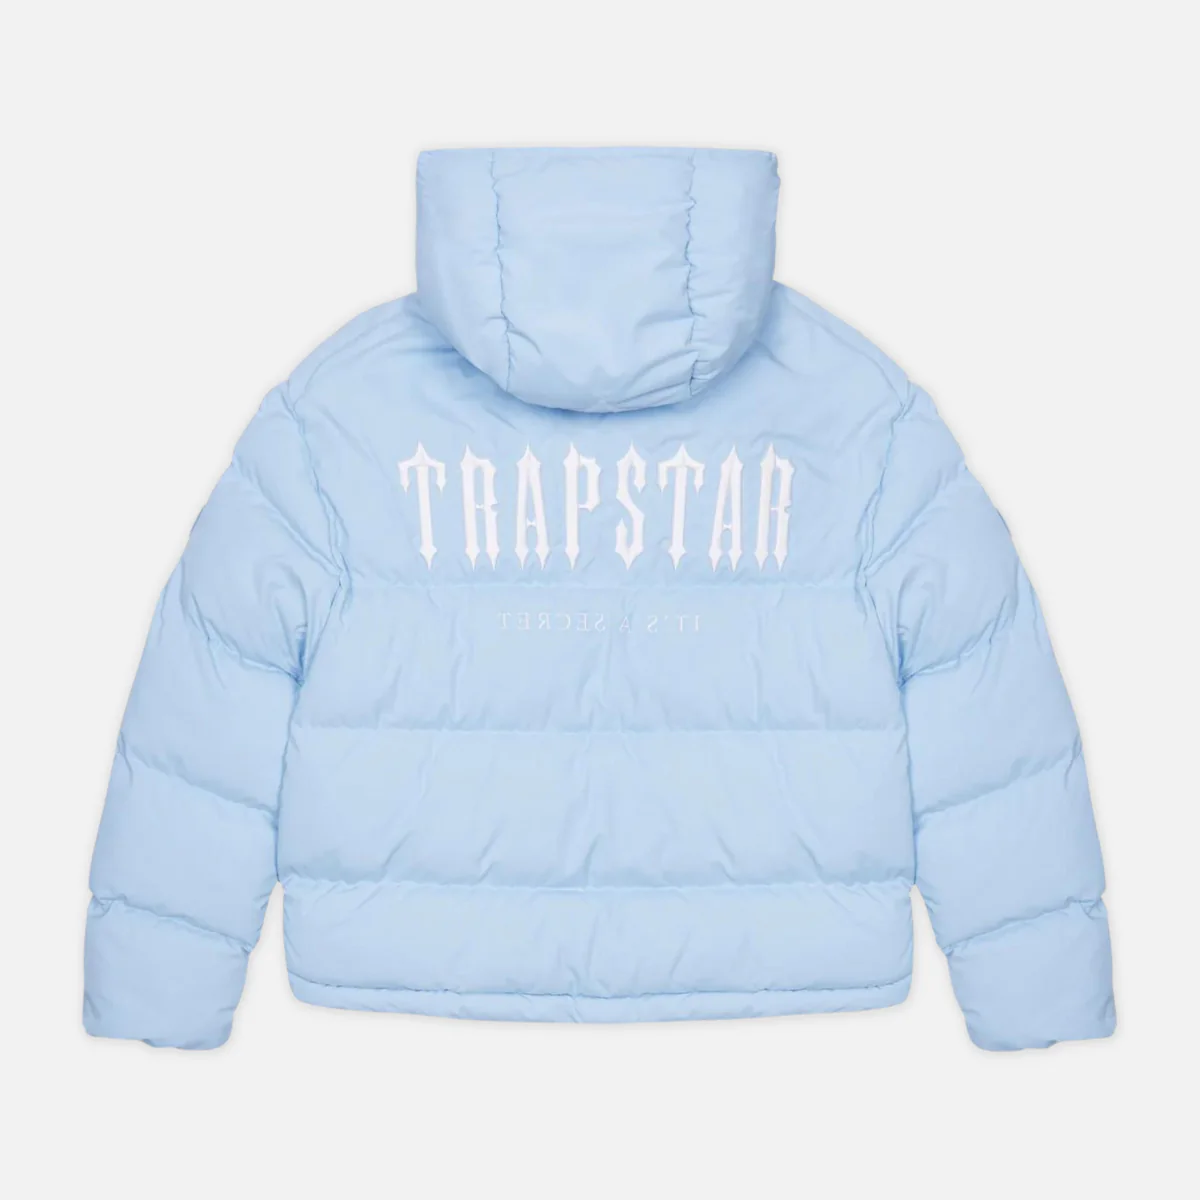 Trapstar Jacket | Official Store